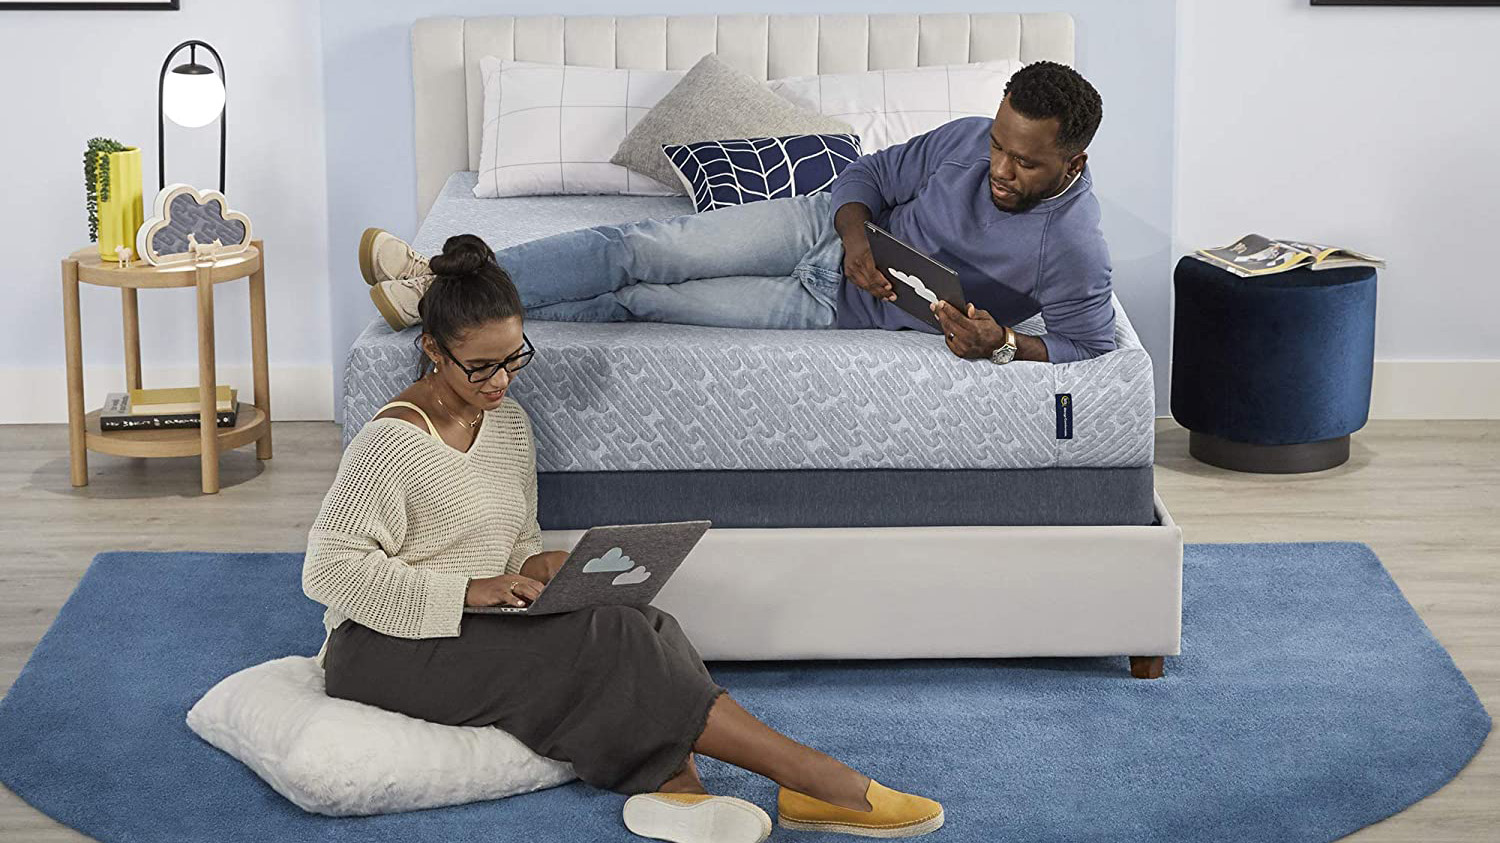 A man lies on the Serta 9 Inch Memory Foam Mattress while a woman sits on the floor working on her laptop